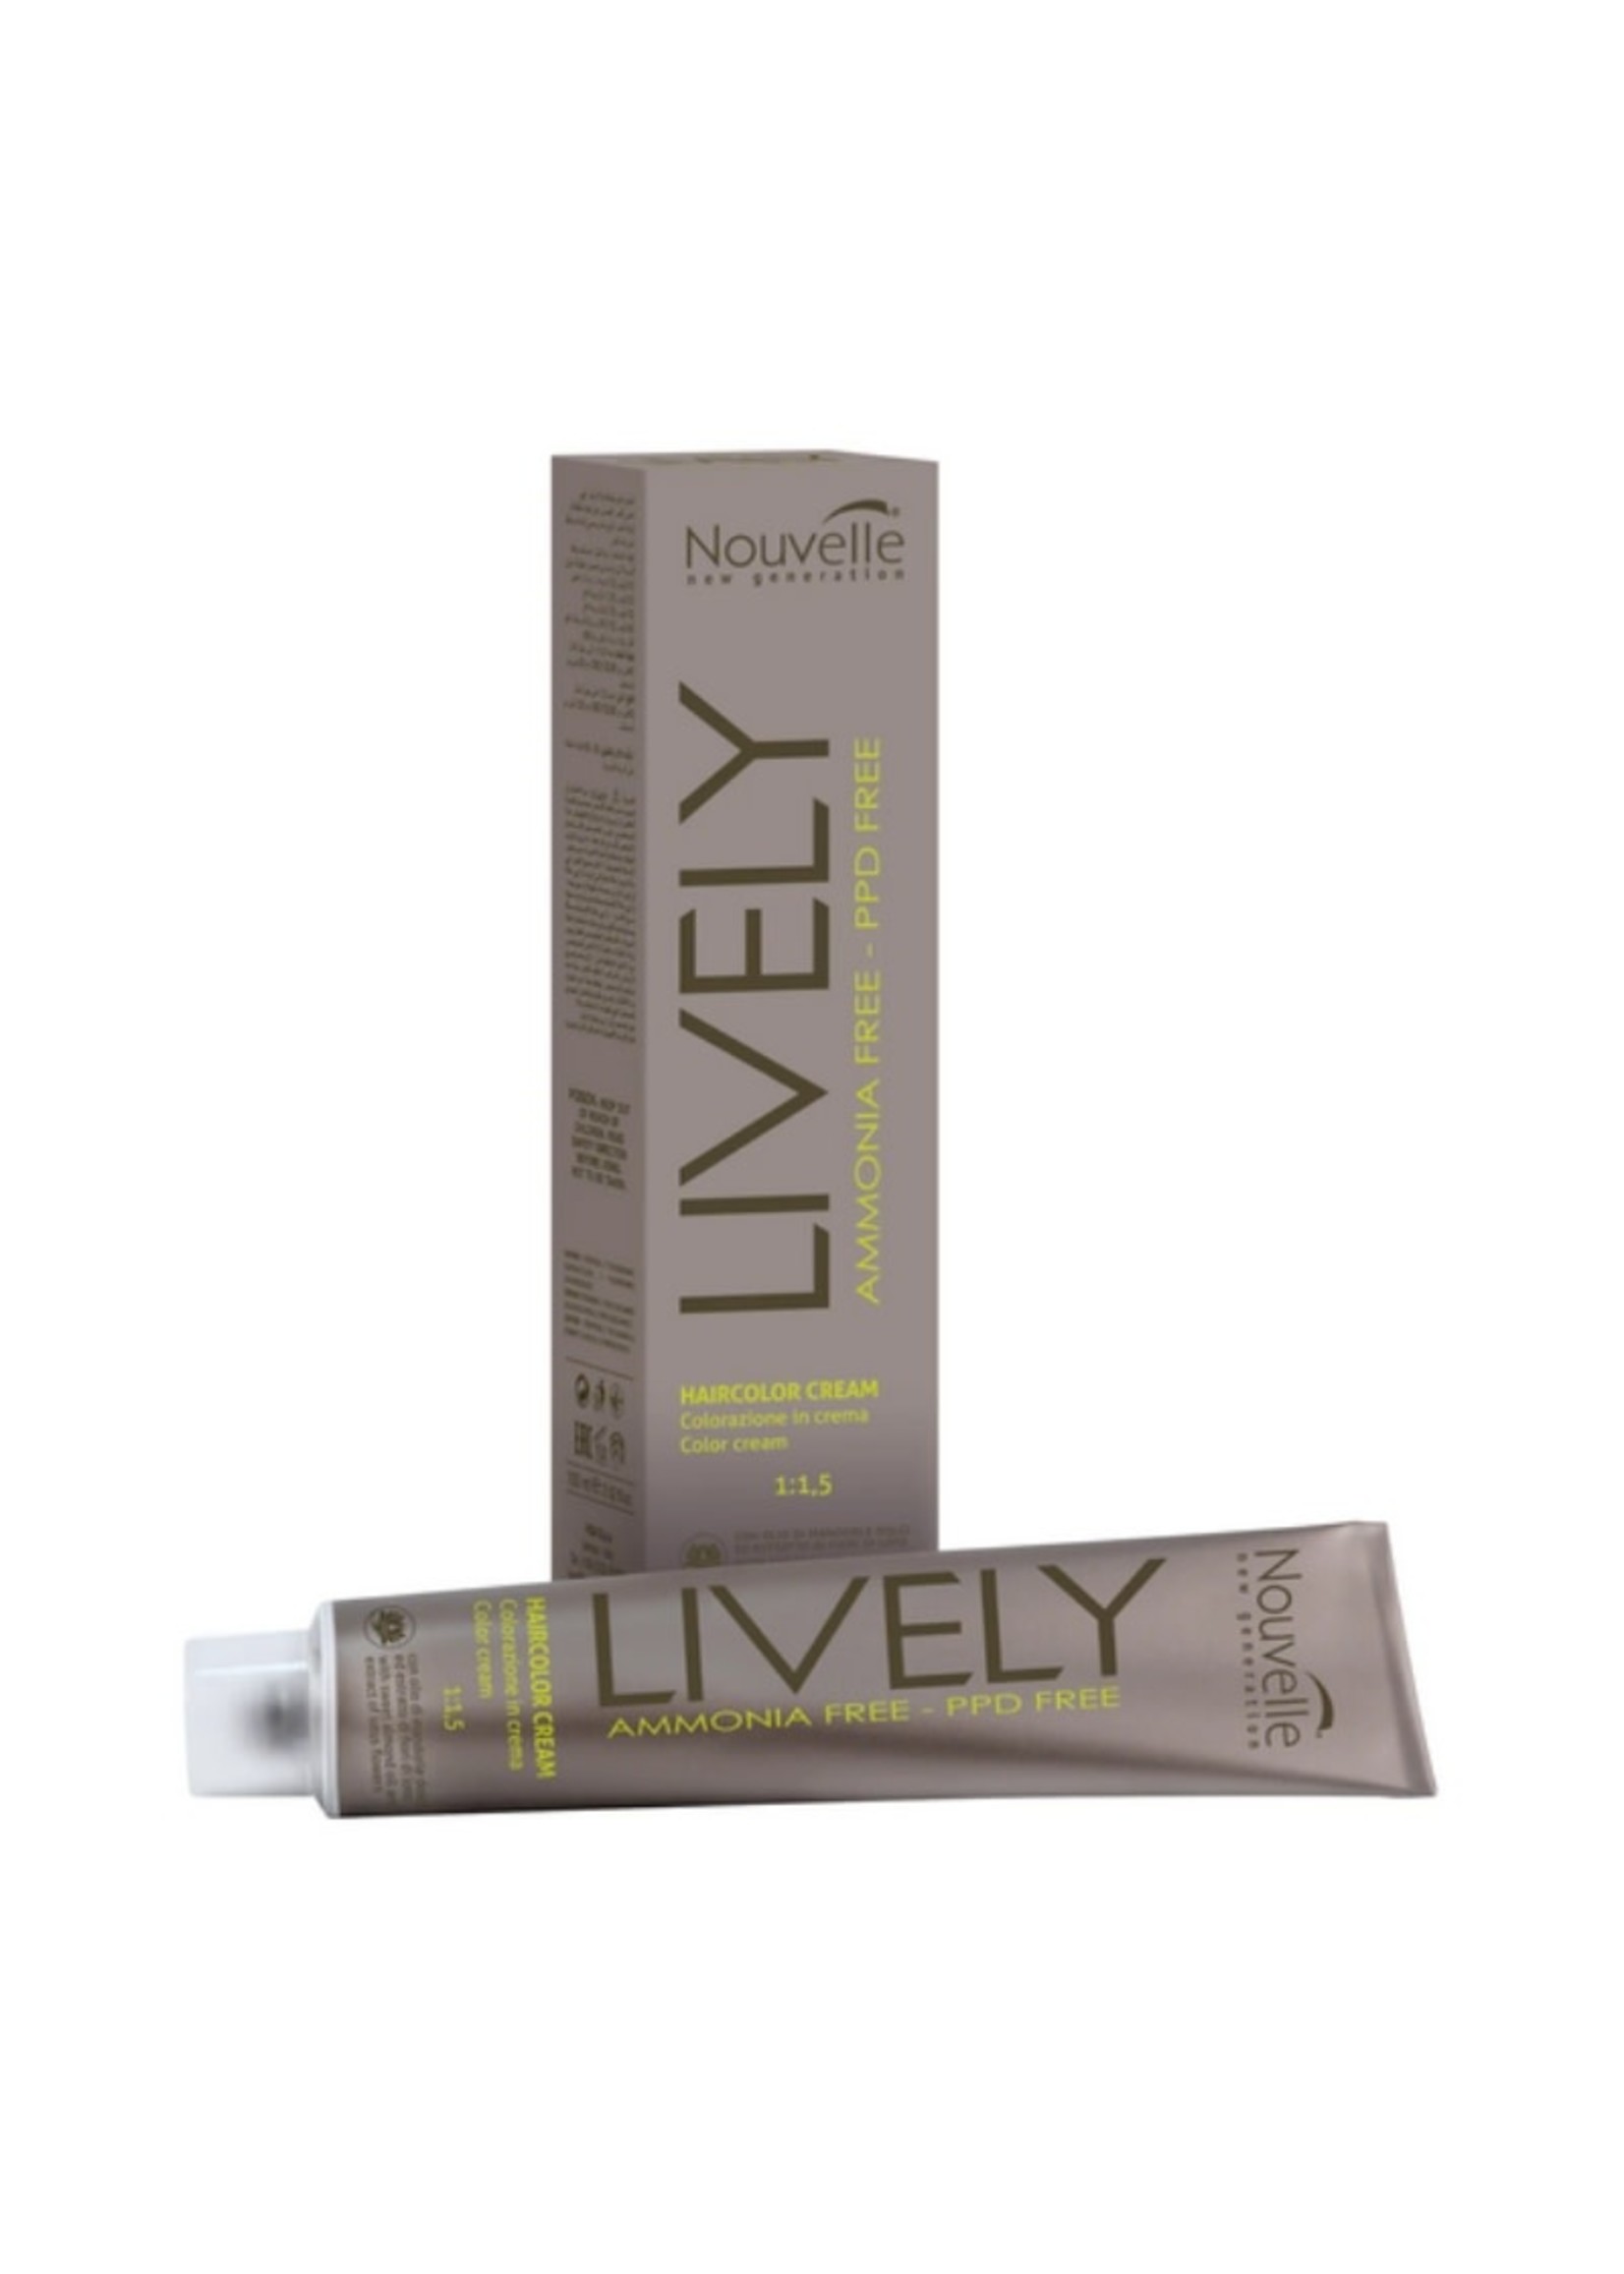 Nouvelle Nouvelle Lively Ammonia-Free Hair Colour 9 Very Light Blonde 100ml